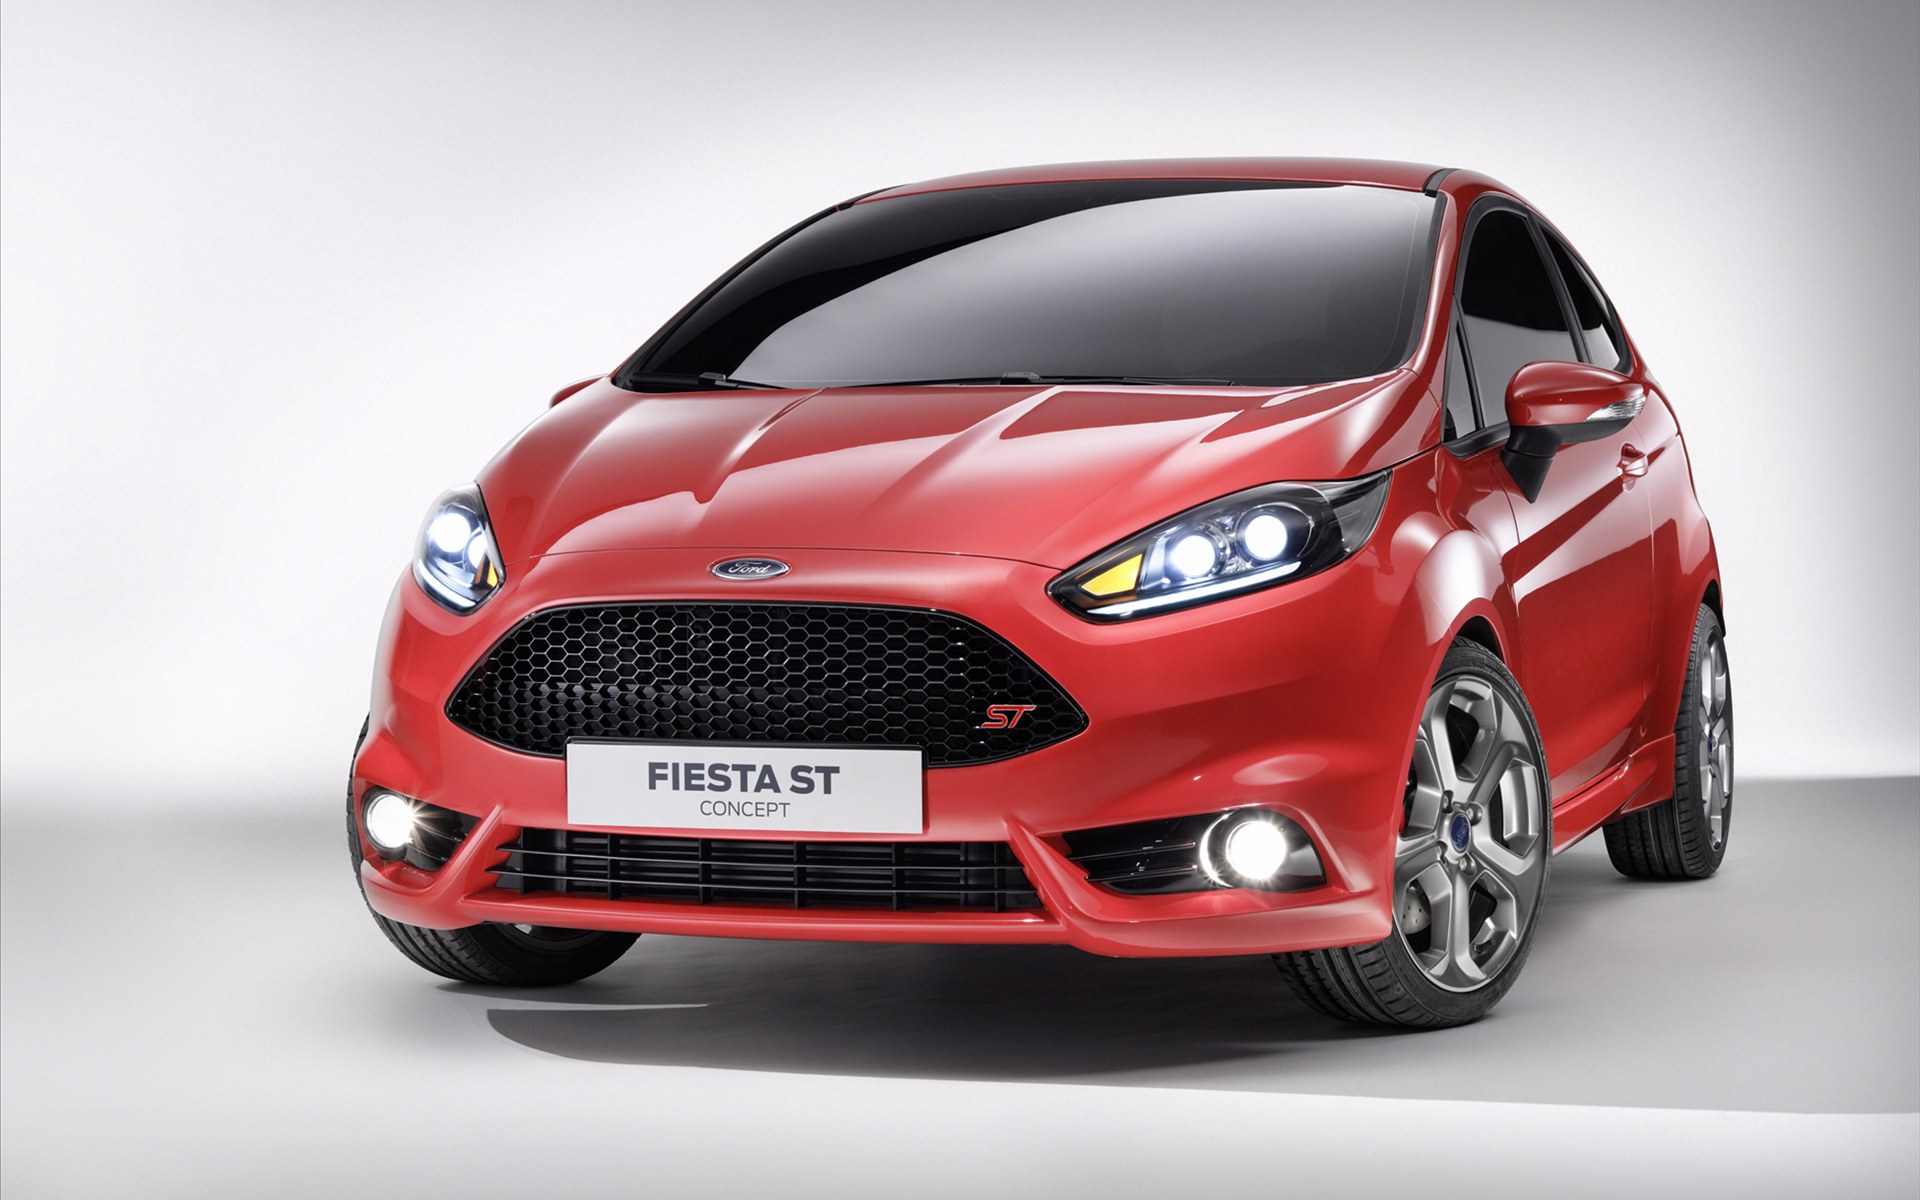 Ford Fiesta St Desktop Wallpaper For HD Widescreen And Mobile